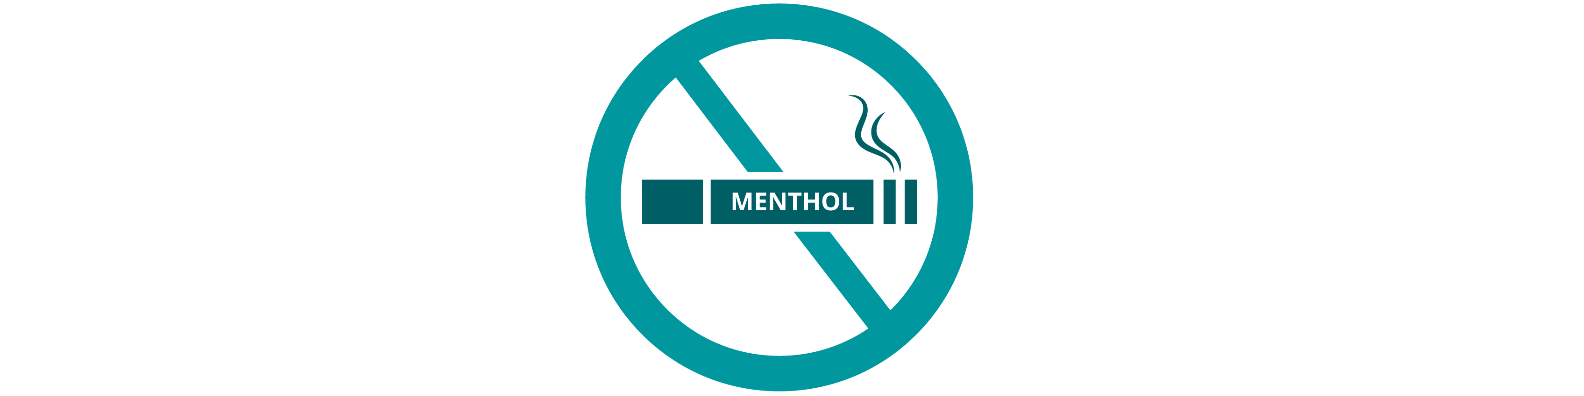 Frequently asked questions about the menthol ban